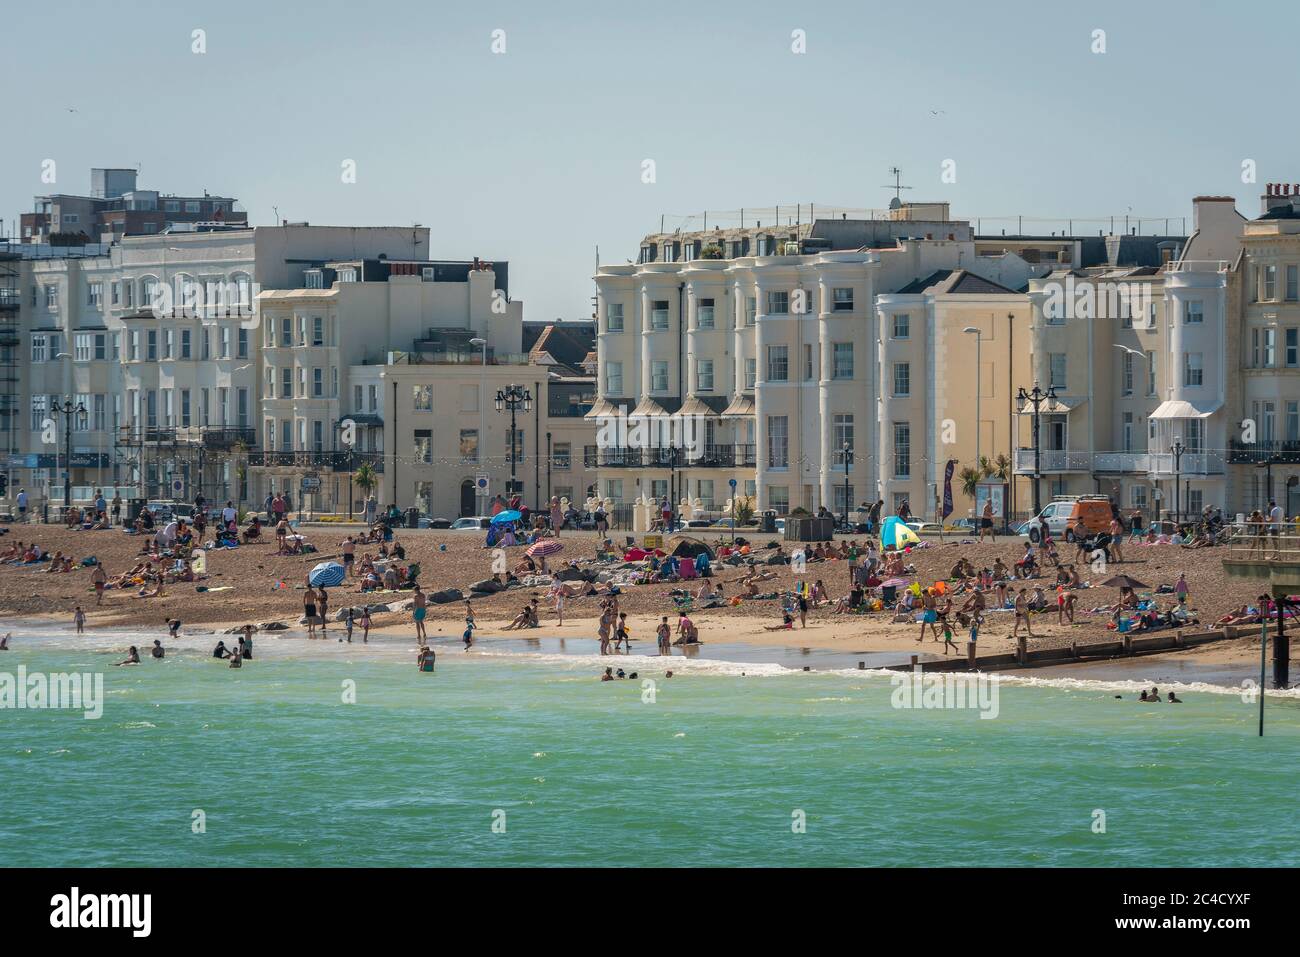 Affollate folle di spiagge a Worthing, West Sussex, Regno Unito Foto Stock